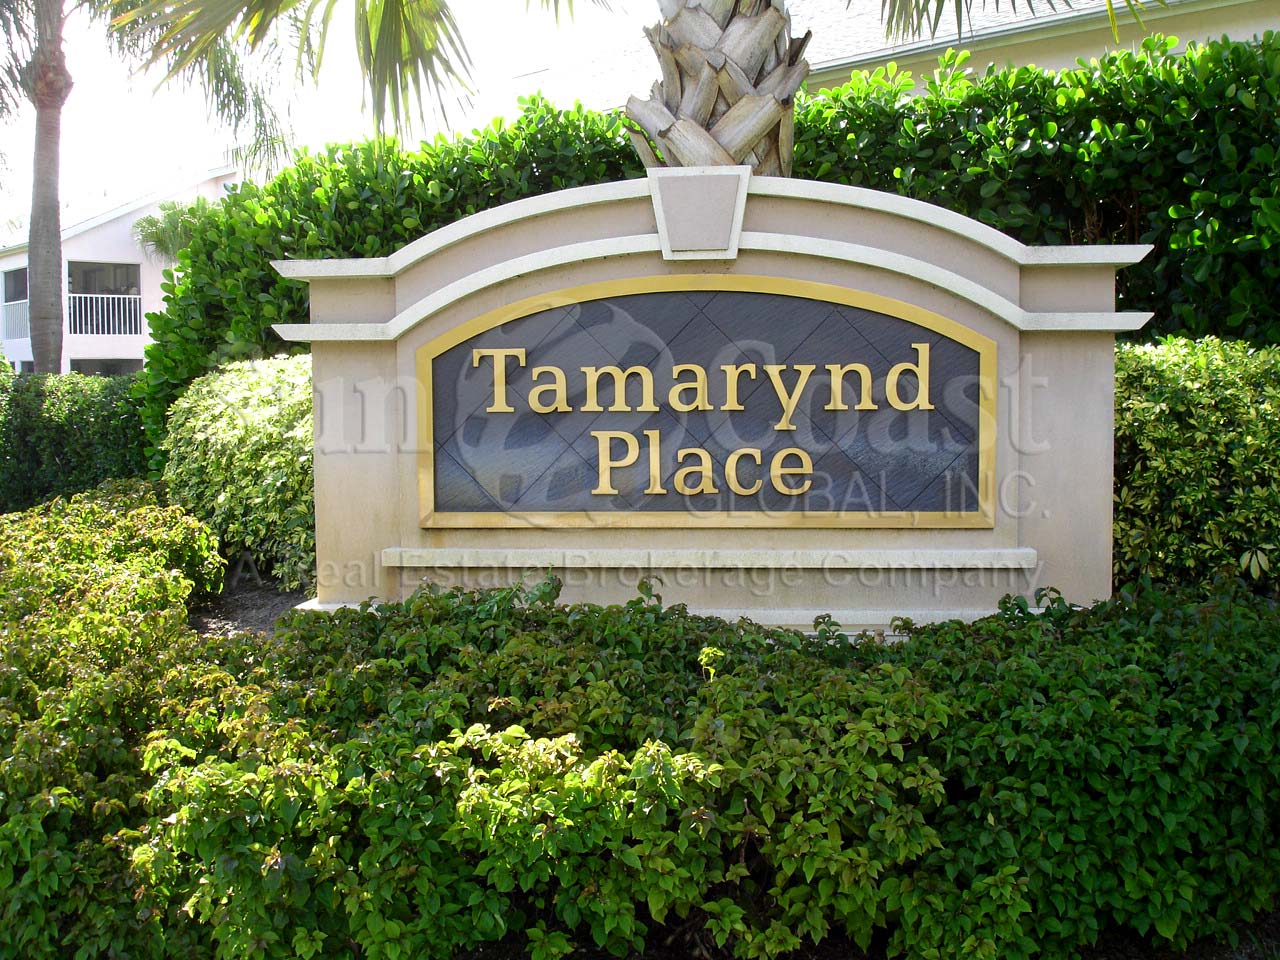 Tamarynd Place Signage